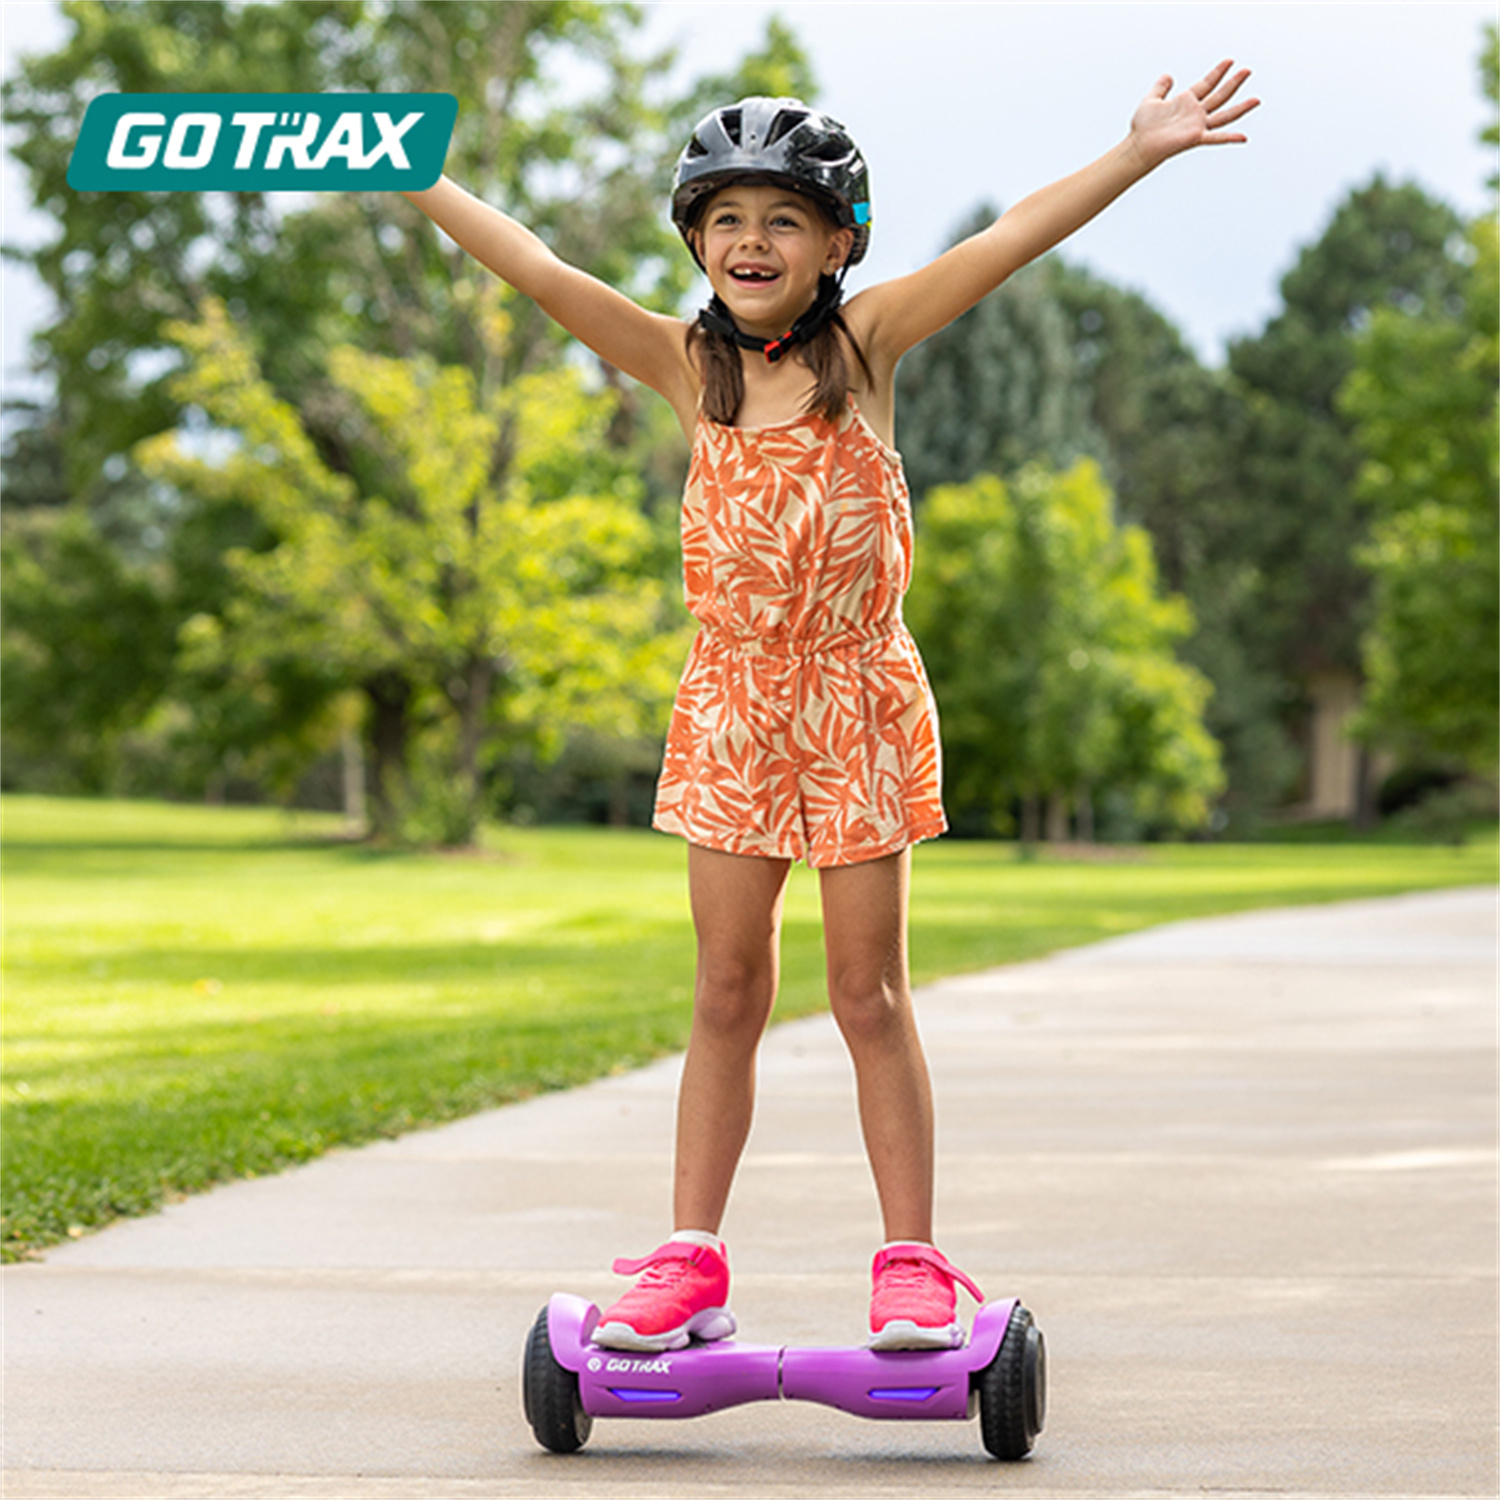 GOTRAX Lil Cub Hoverboard 6.5" Wheels, Max 2.5 Miles, 6.2mph Self Balance for 44-88lbs Kids, Purple - image 4 of 11